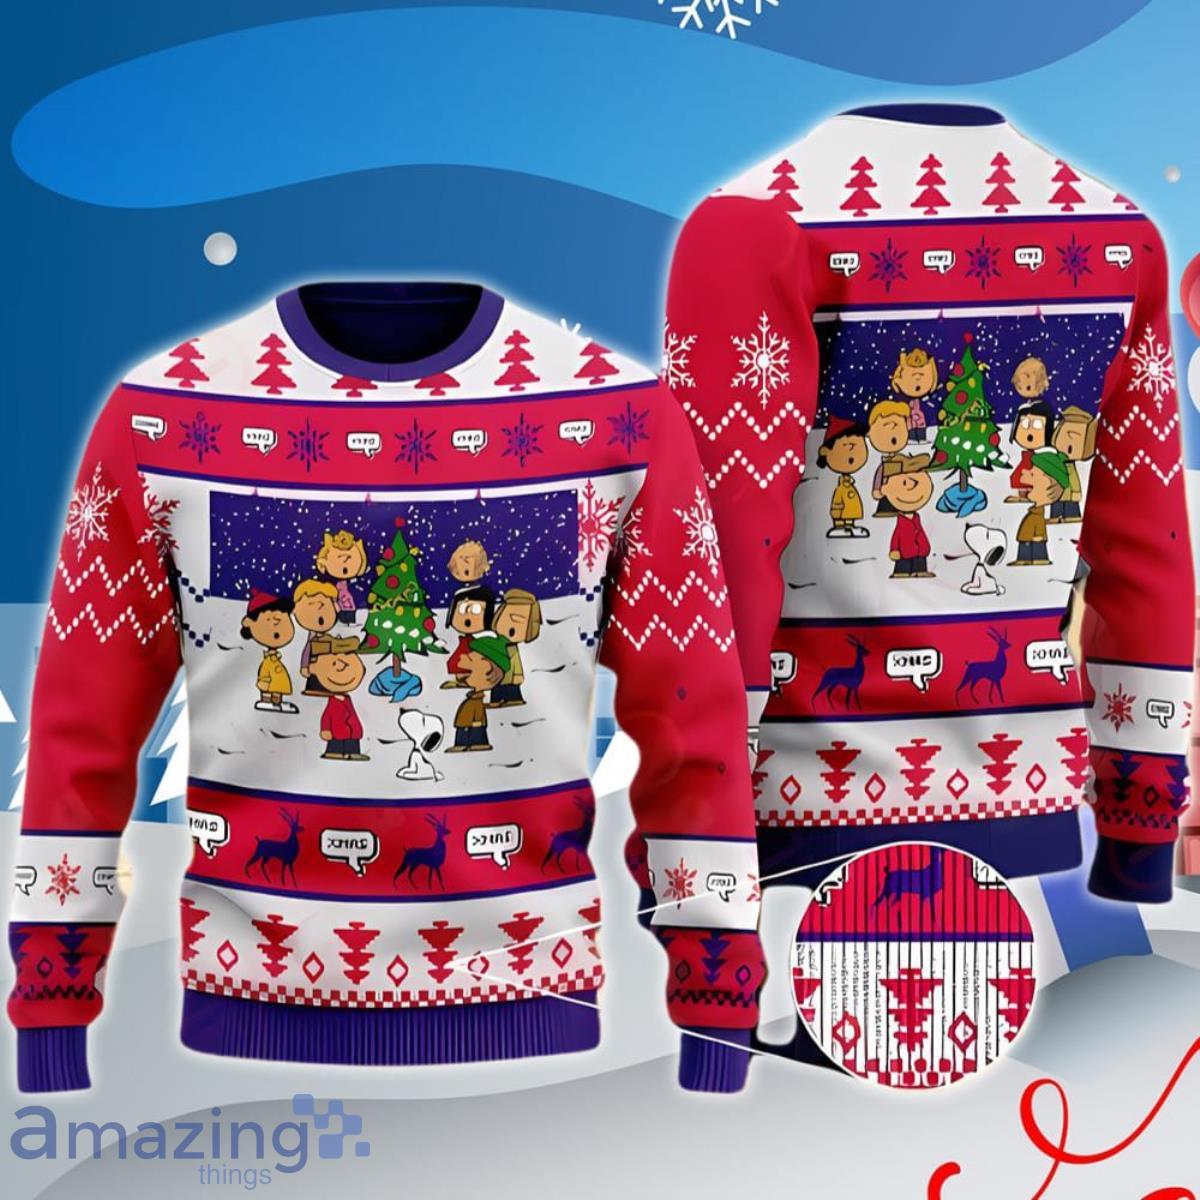 https://image.whatamazingthings.com/2023/11/snoopy-christmas-ugly-sweater-snoopy-charlie-brown-peanuts-characters-christmas-unique-gift.jpg